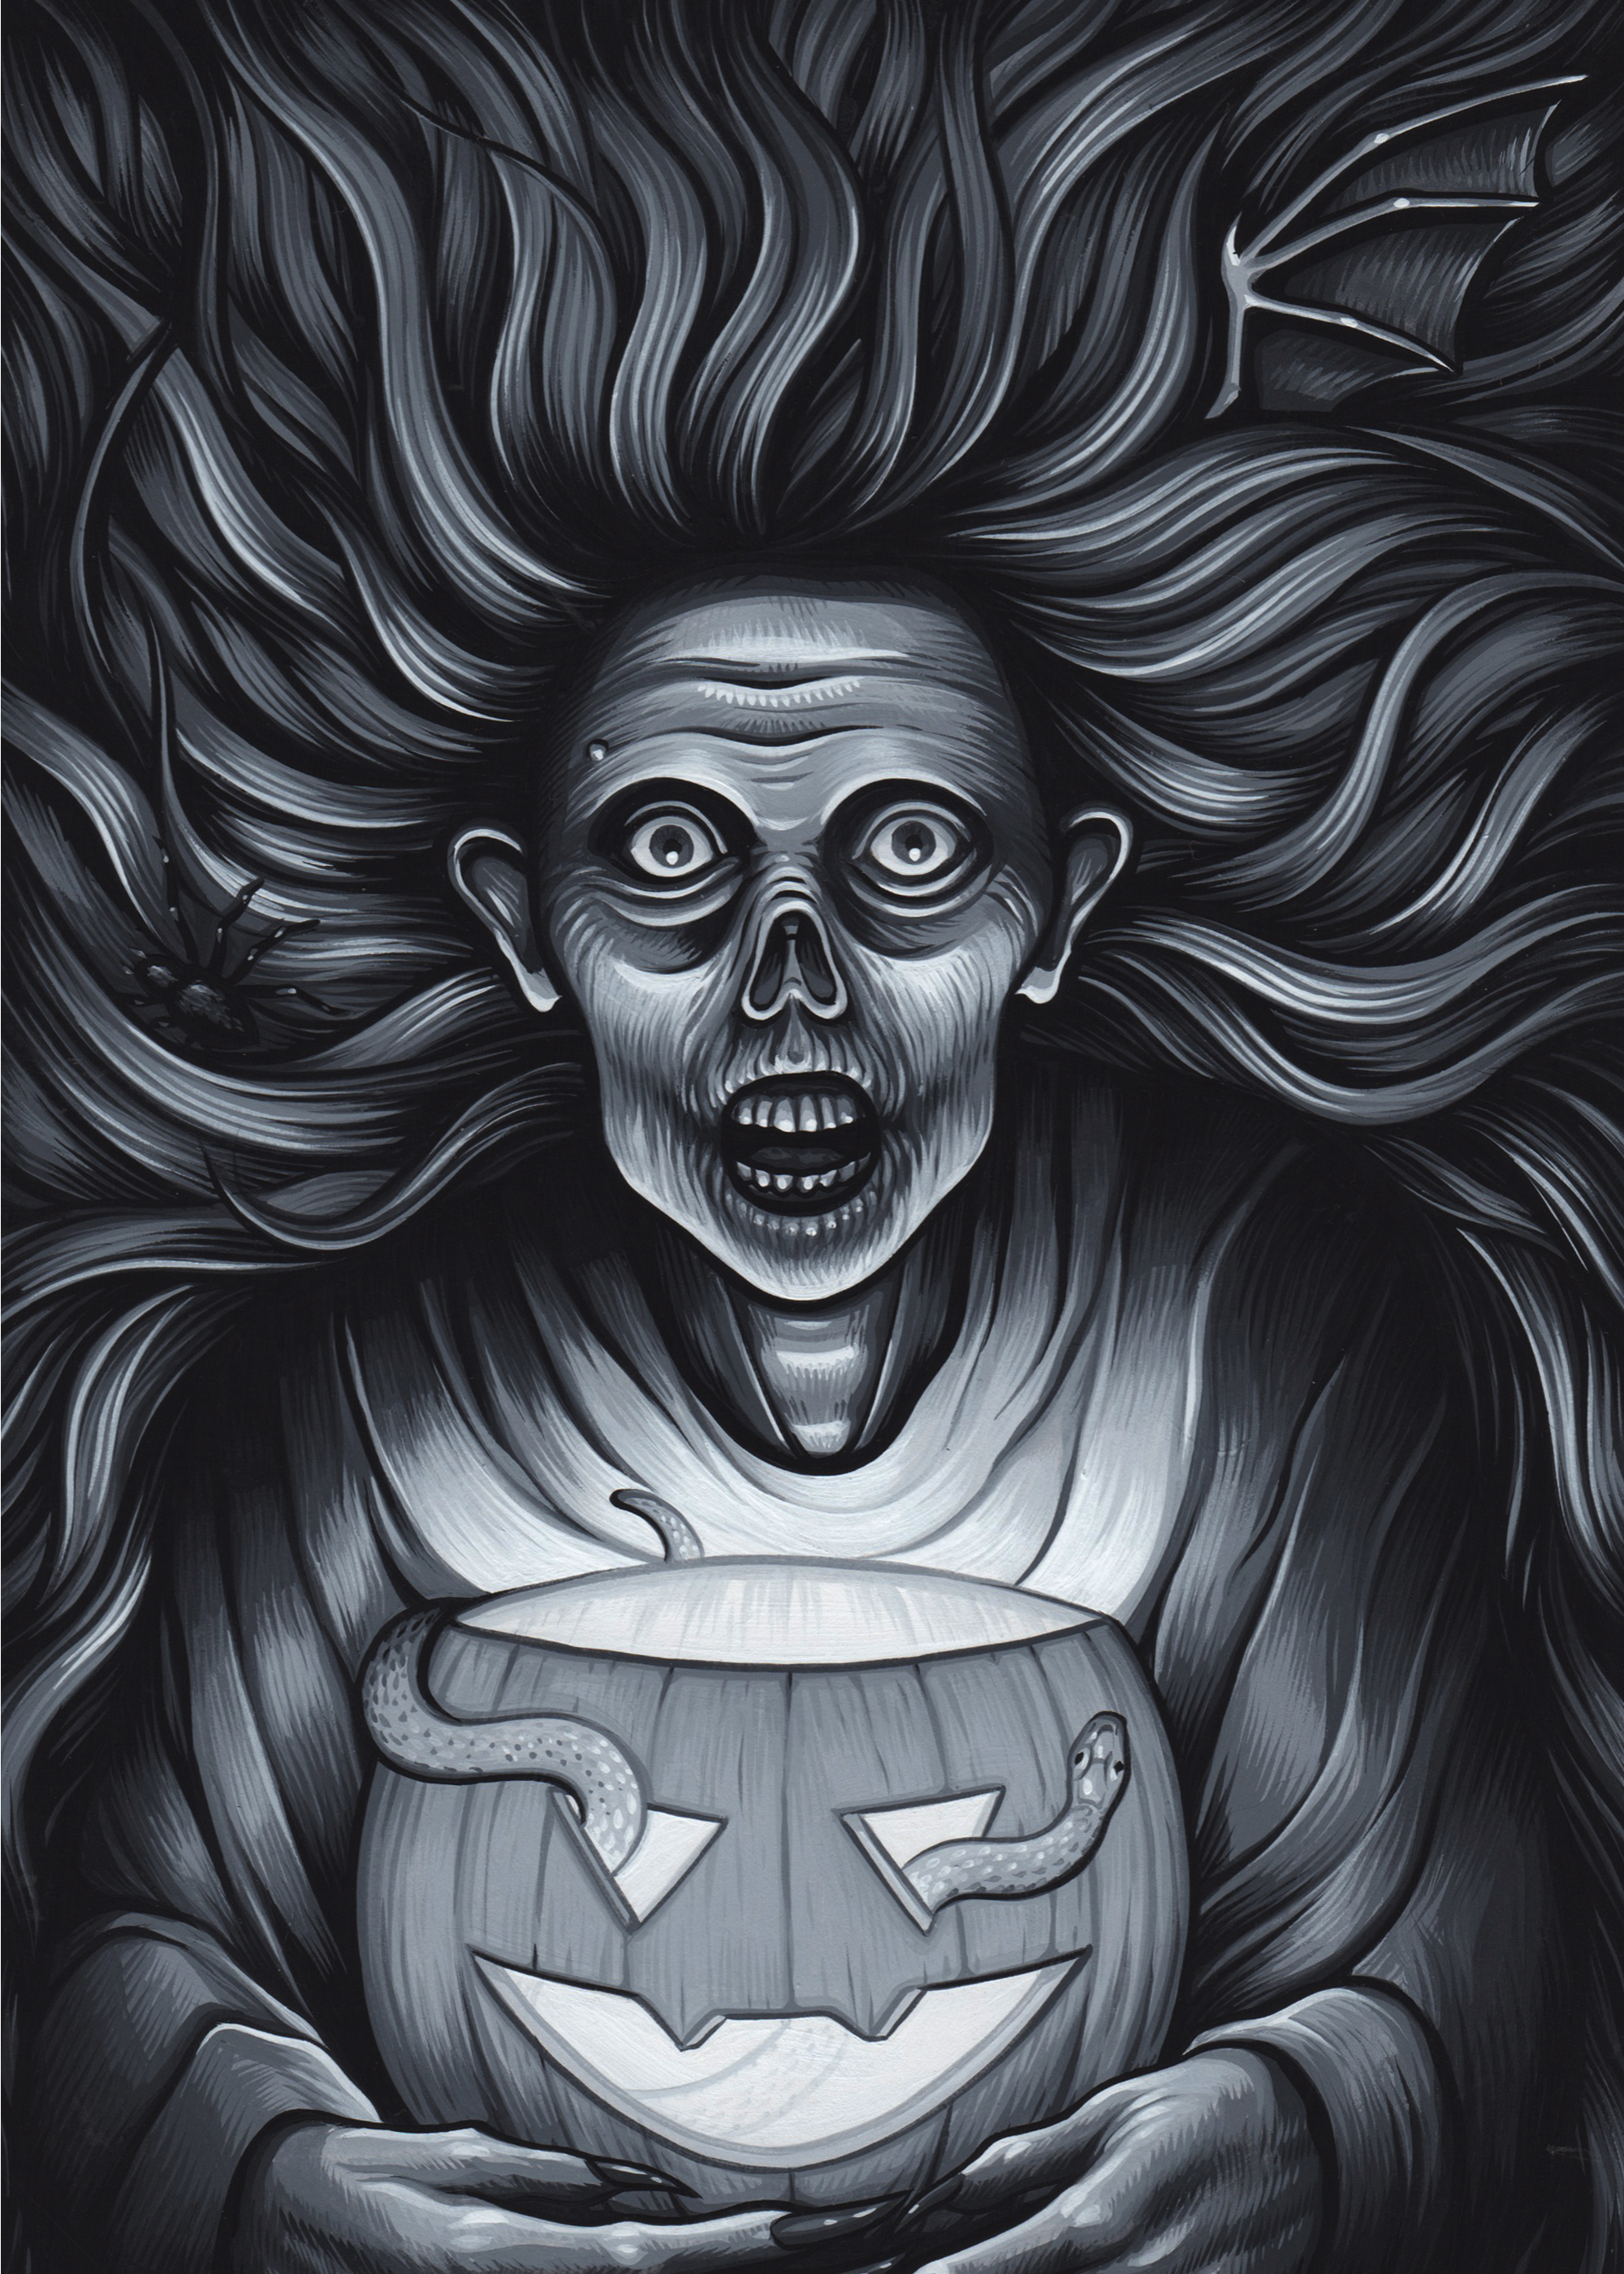  Exclusive artwork done for the Cryptocurium Oct. 2015 Parcel of Terror  Gouache on paper 